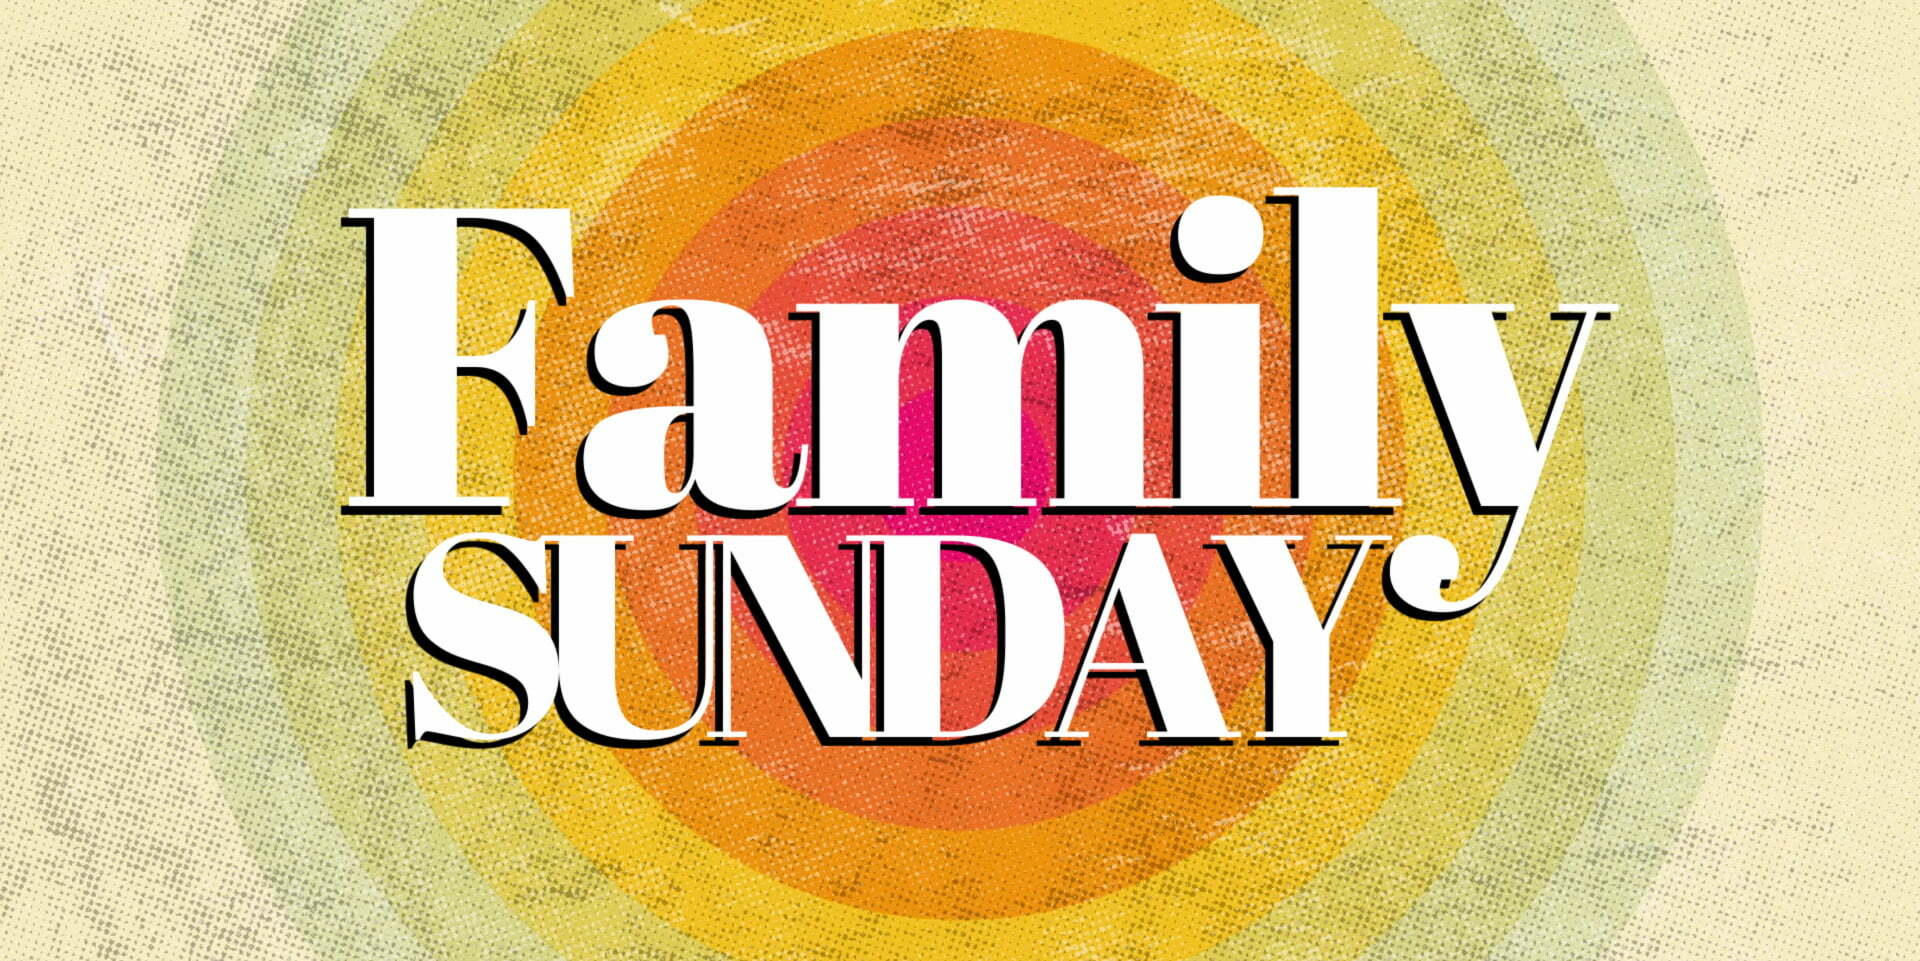 May 29 is a FAMILY SUNDAY